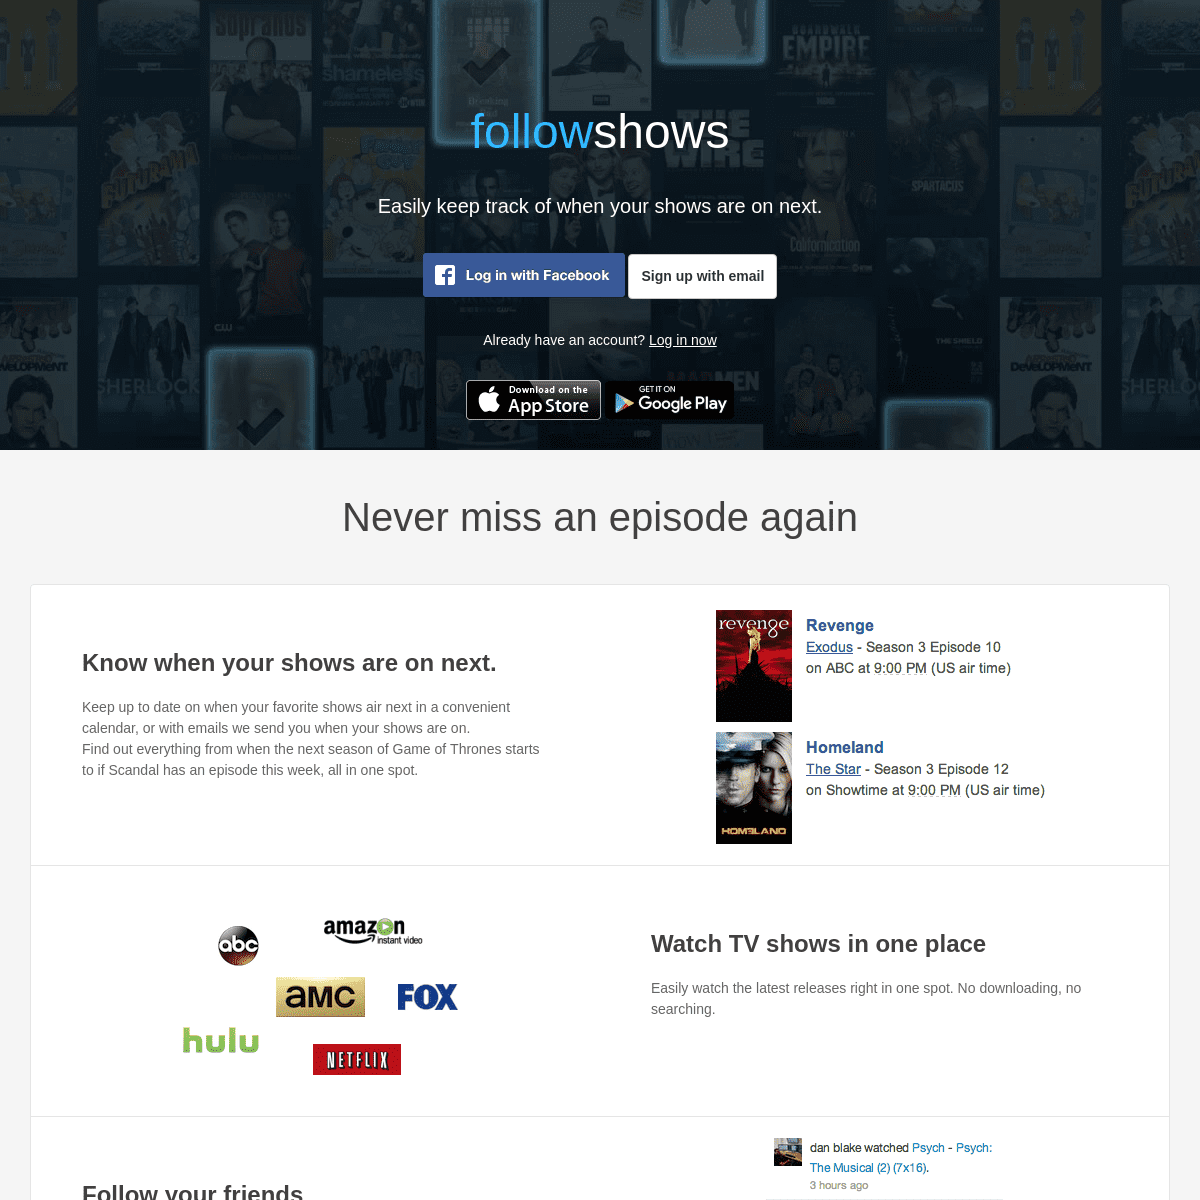 A complete backup of followshows.com